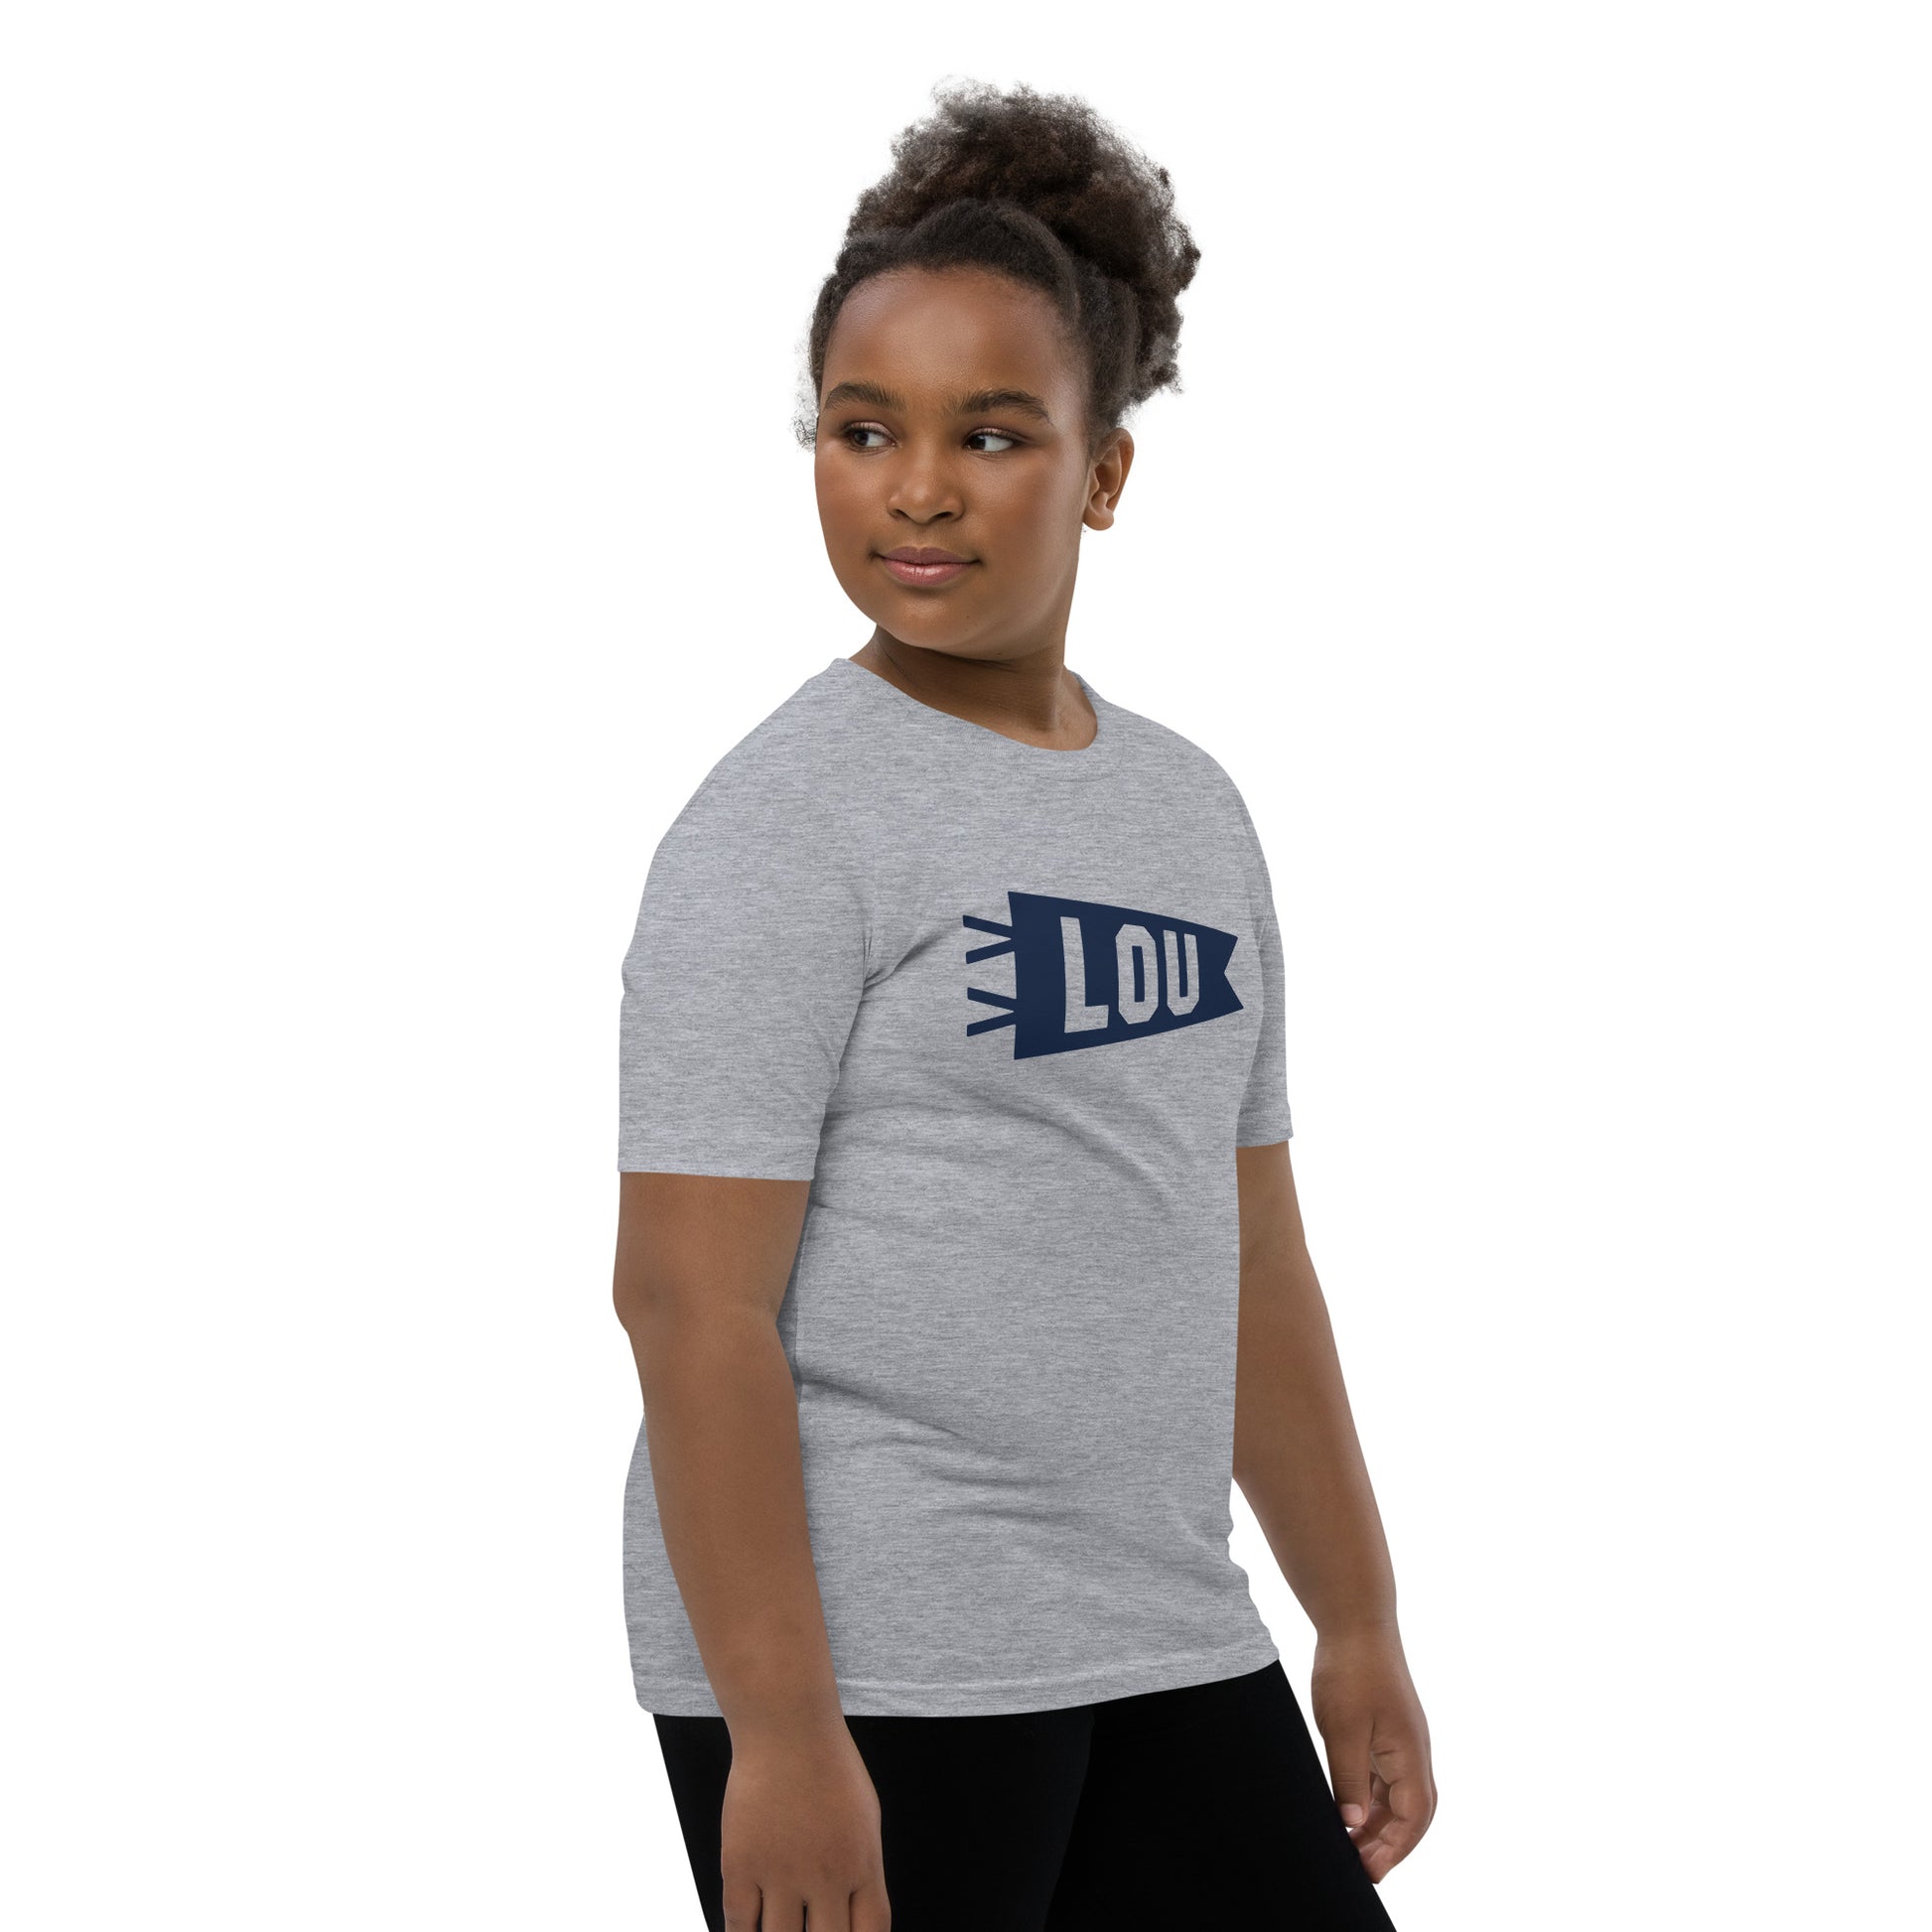 Kid's Airport Code Tee - Navy Blue Graphic • LOU Louisville • YHM Designs - Image 03